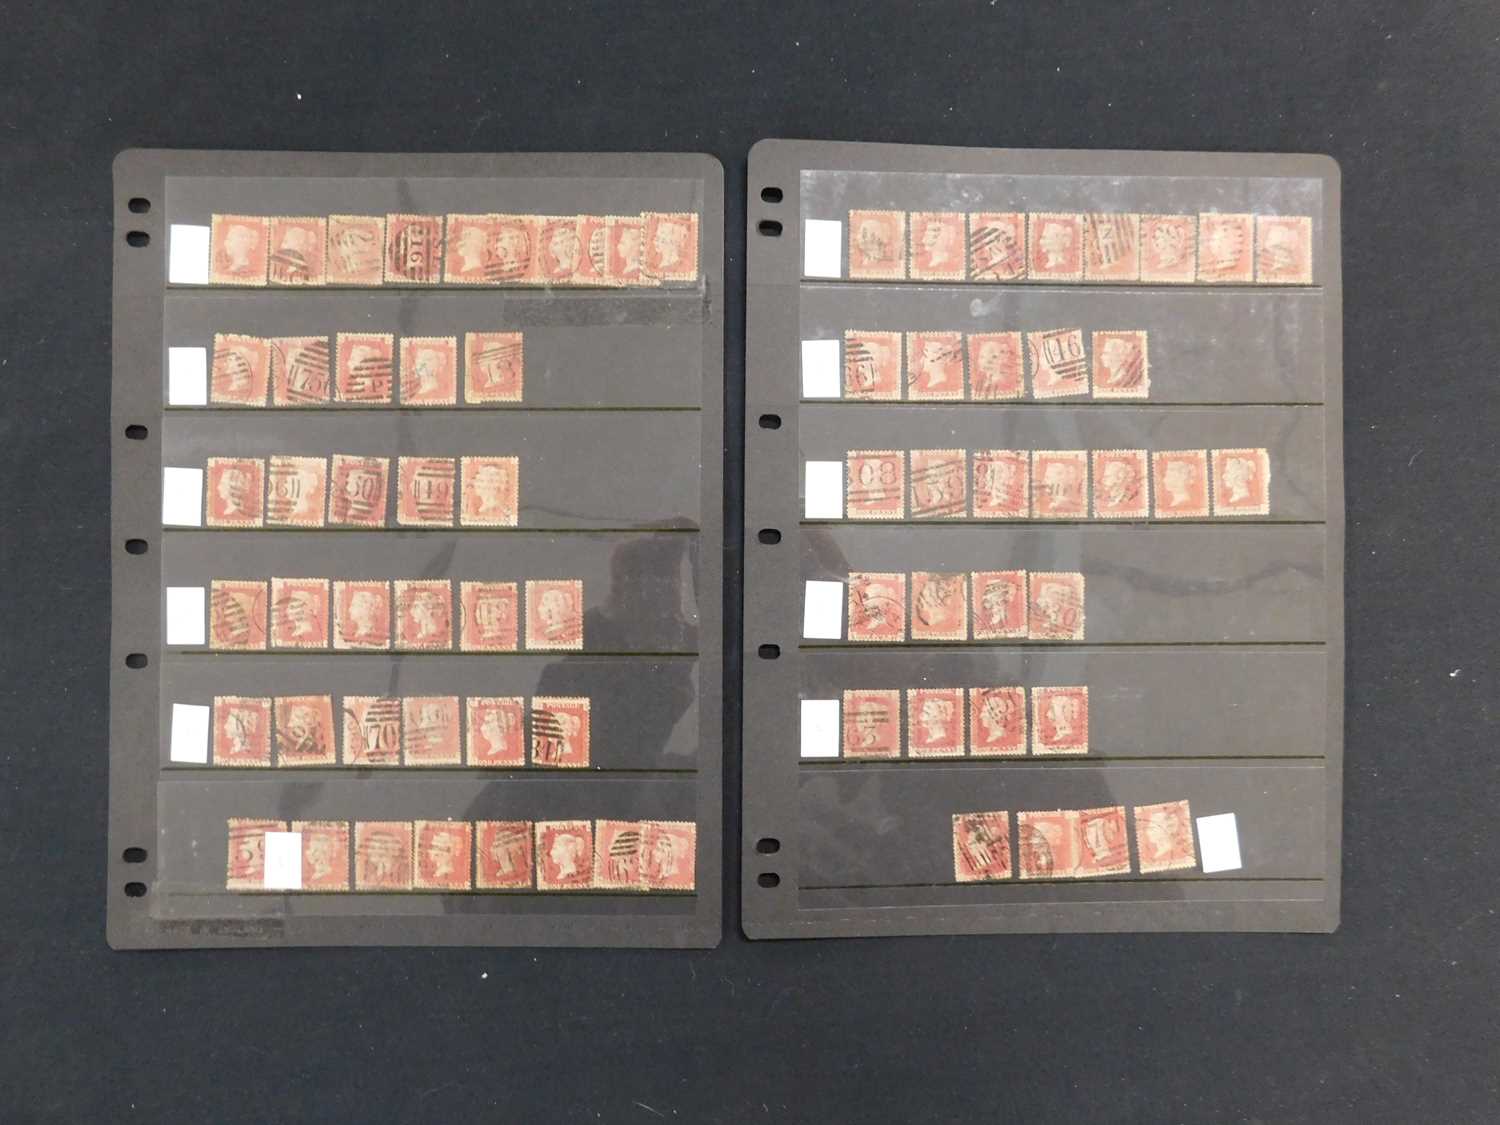 GB collection of 1858-79 penny red plate numbers on 2 Hagner stock cards